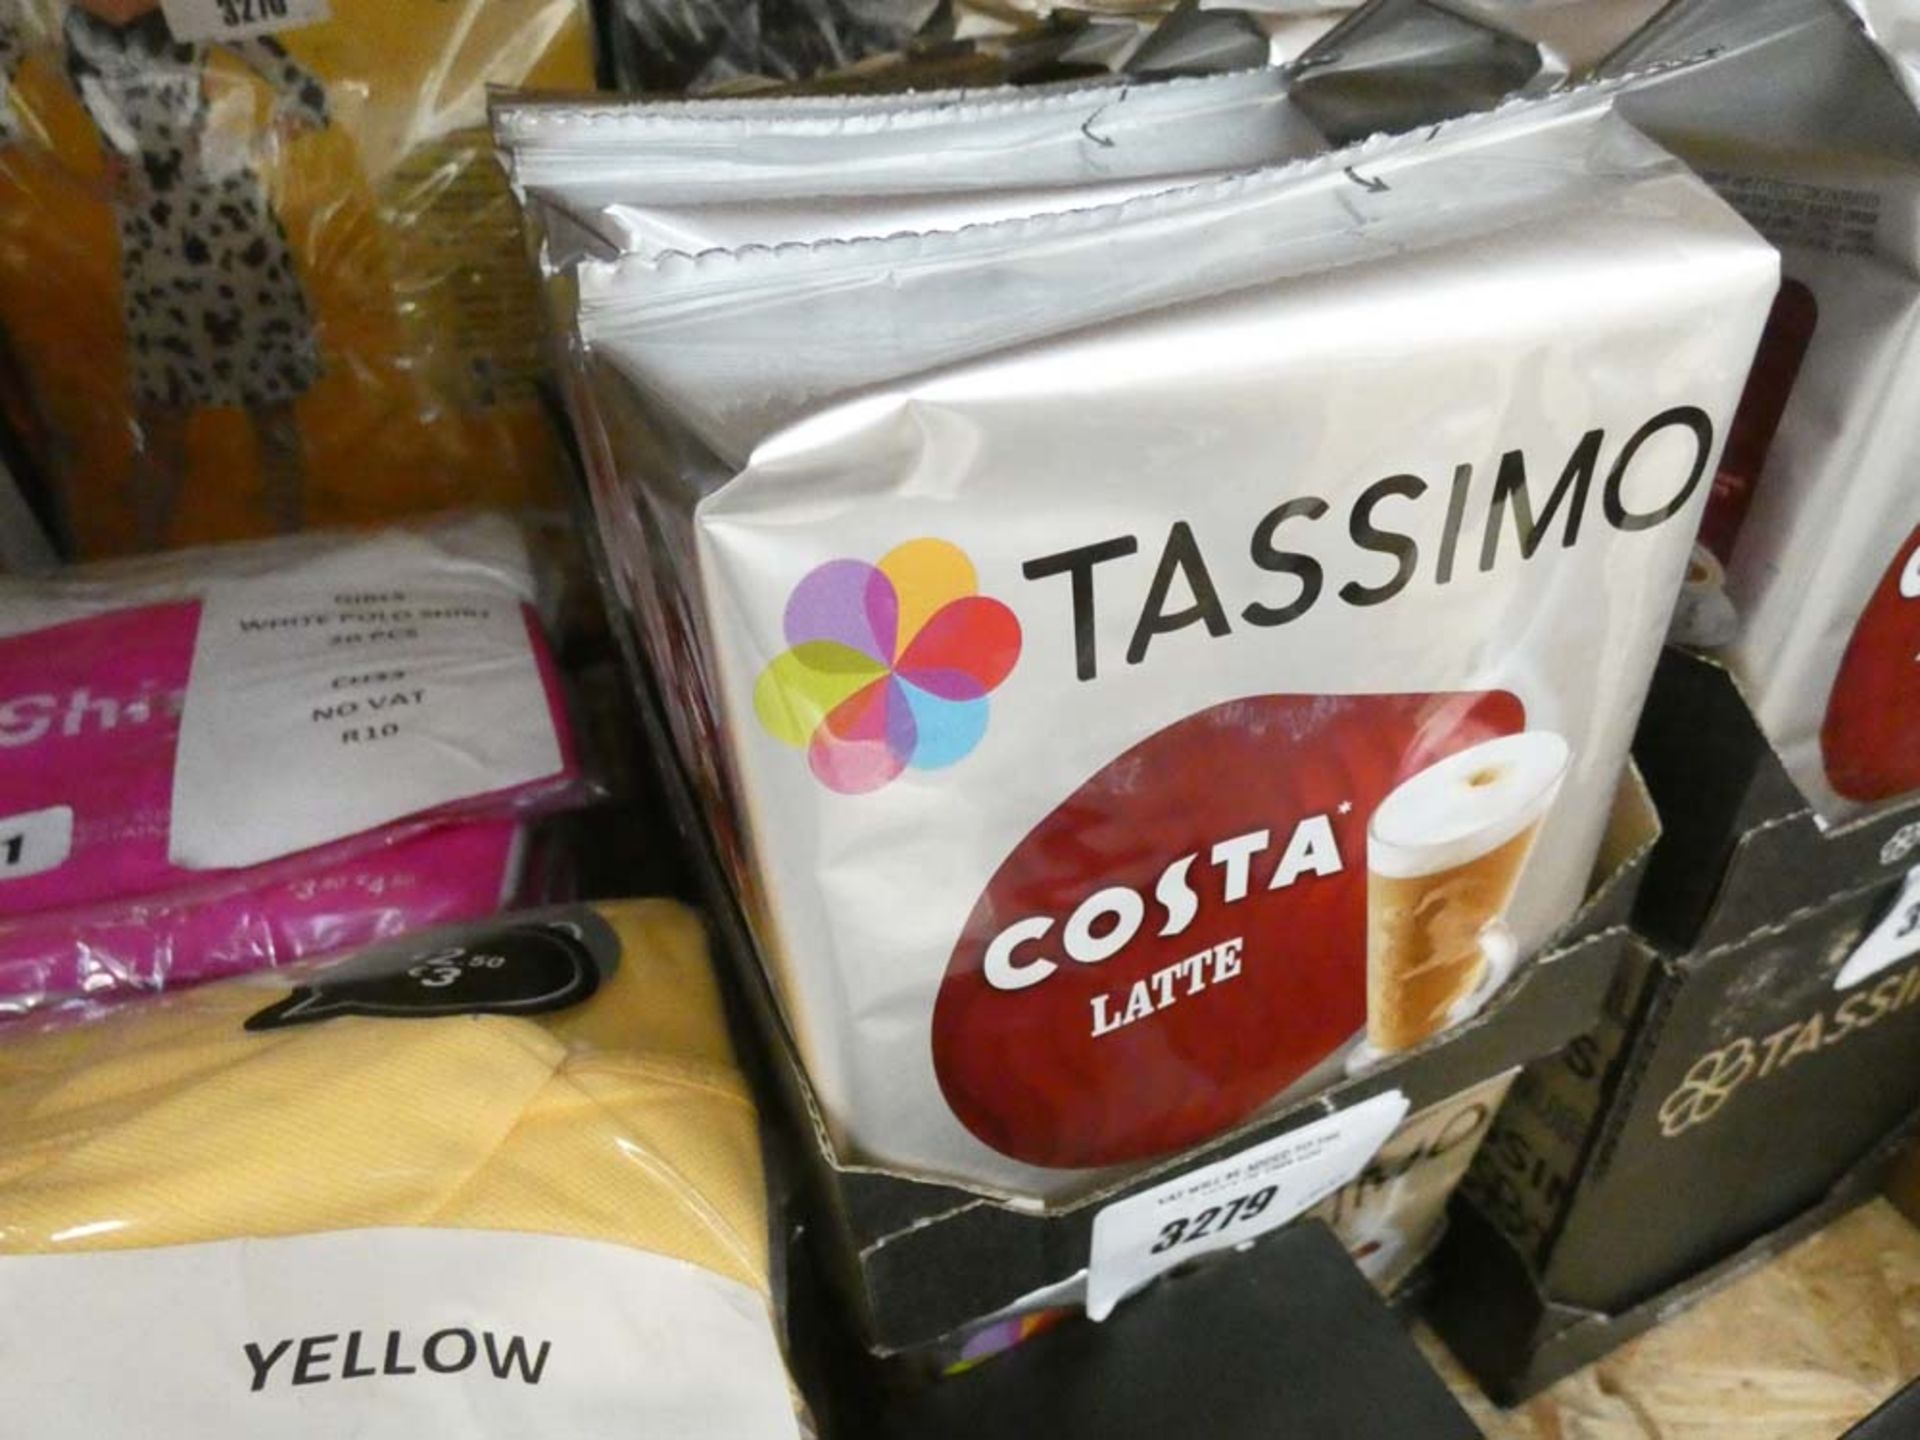 Two trays of Tassimo Costa coffee pods